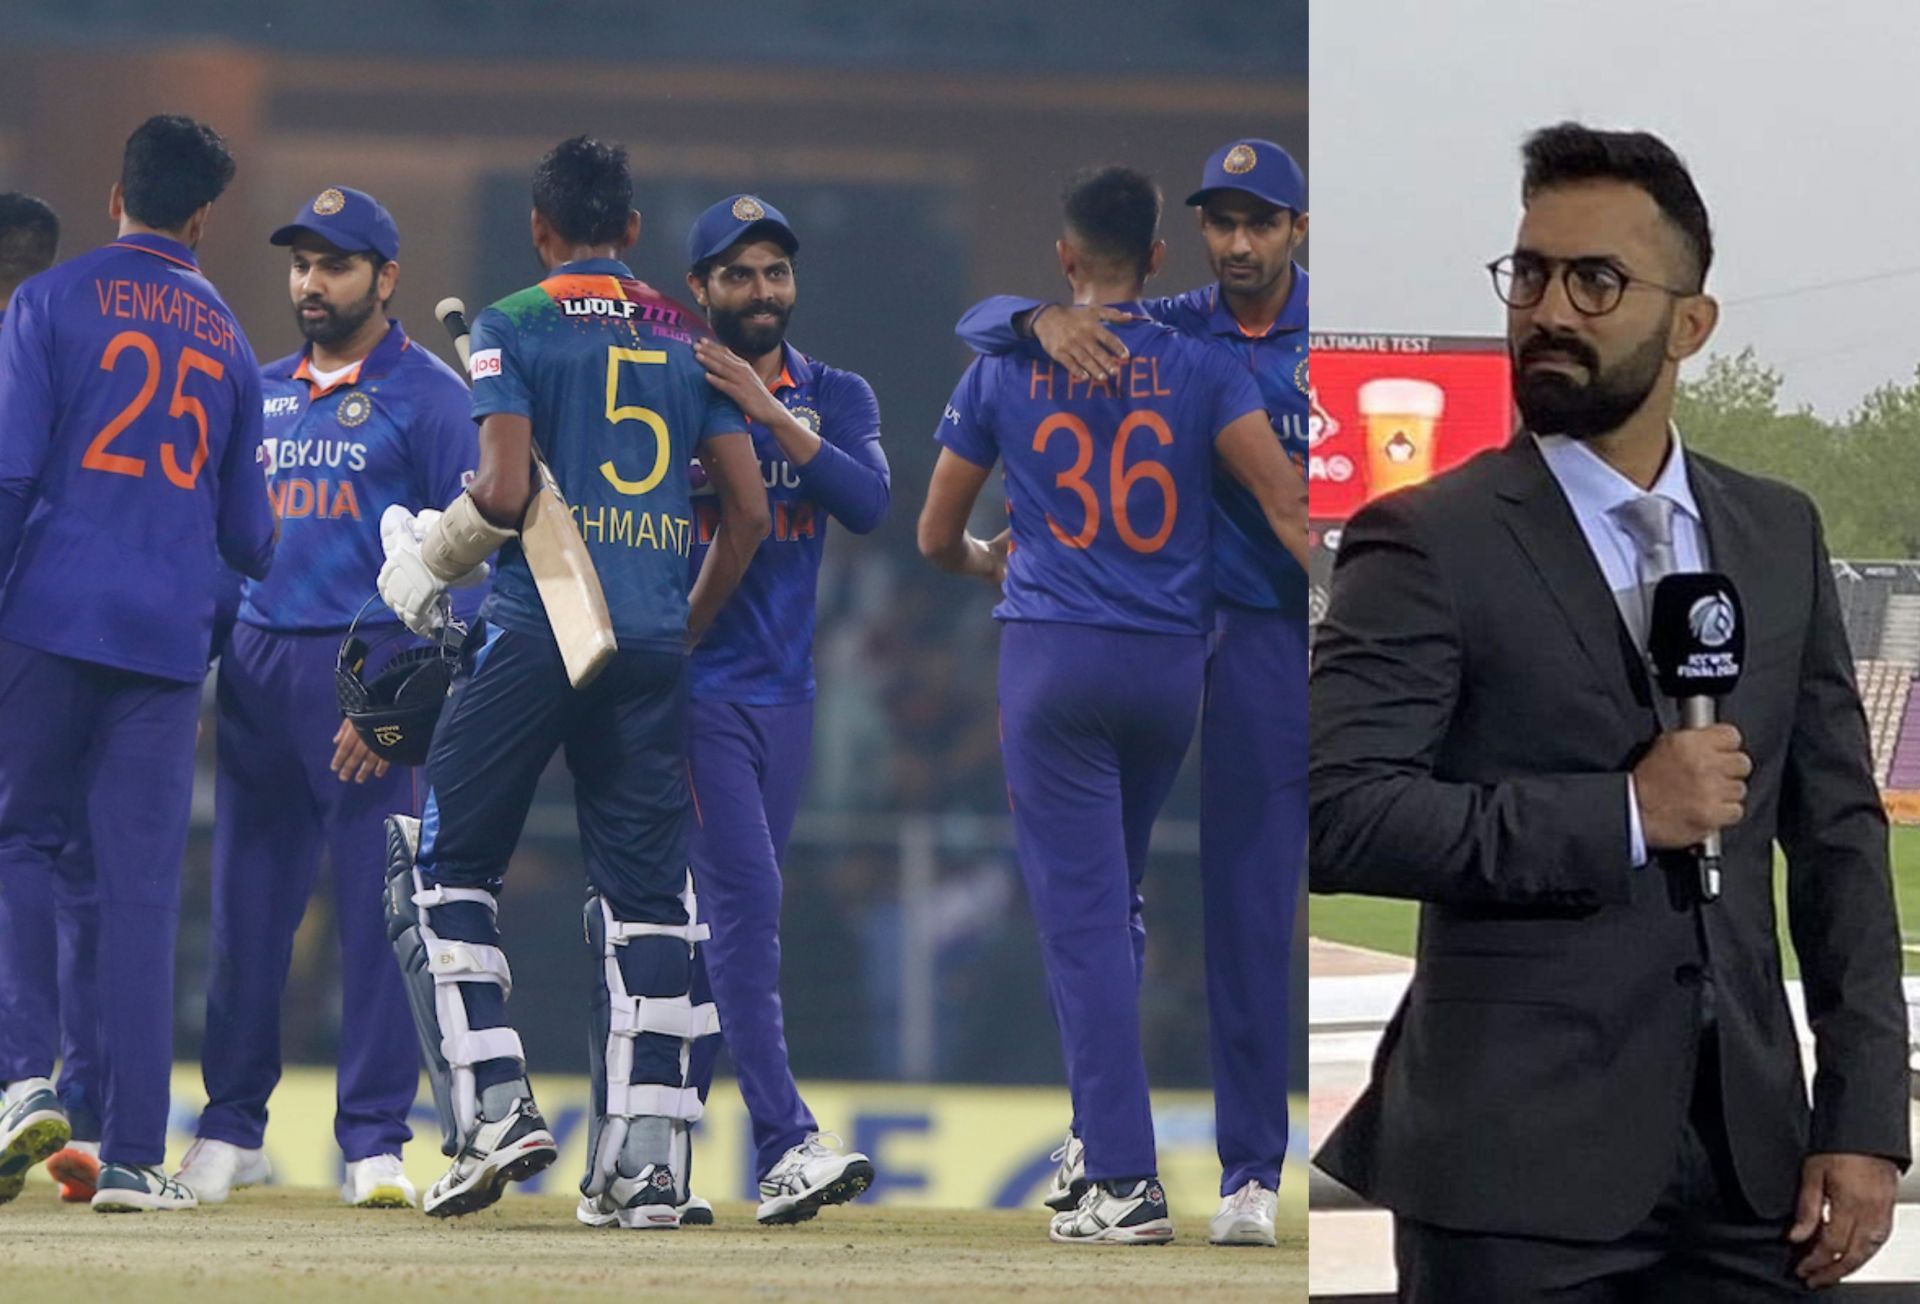 Dinesh Karthik highlights takeaways for India from the clinical win against Sri Lanka.